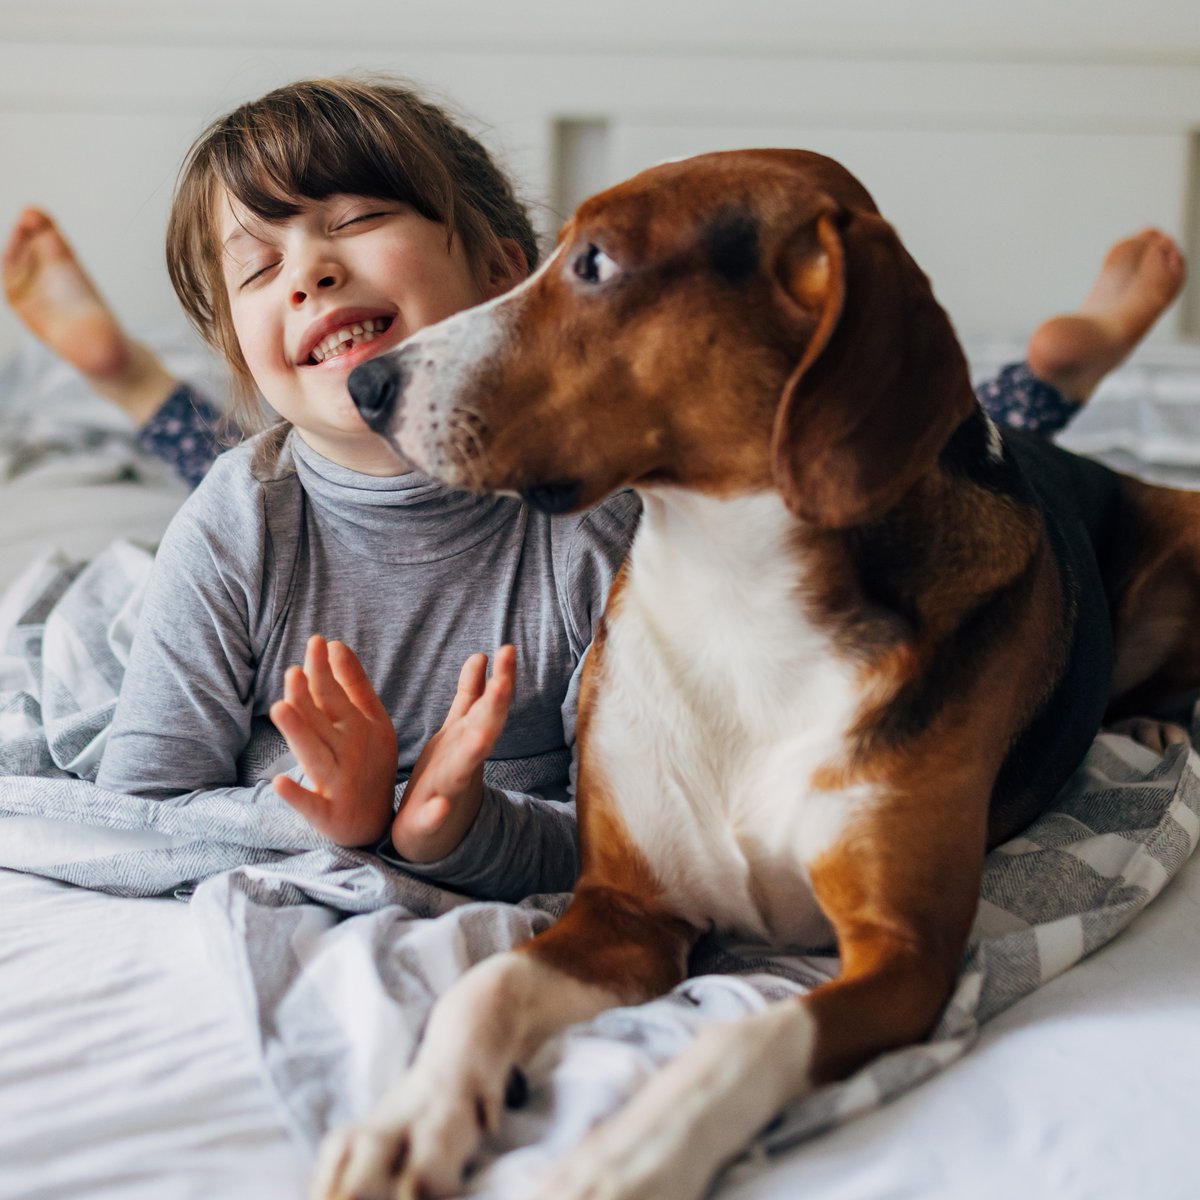 The unconditional love from our pets is a special kindness that has the ability to heal. This #NationalPetDay, give an extra cuddle to your furry friends who provide support year round. #Hellohumankindness